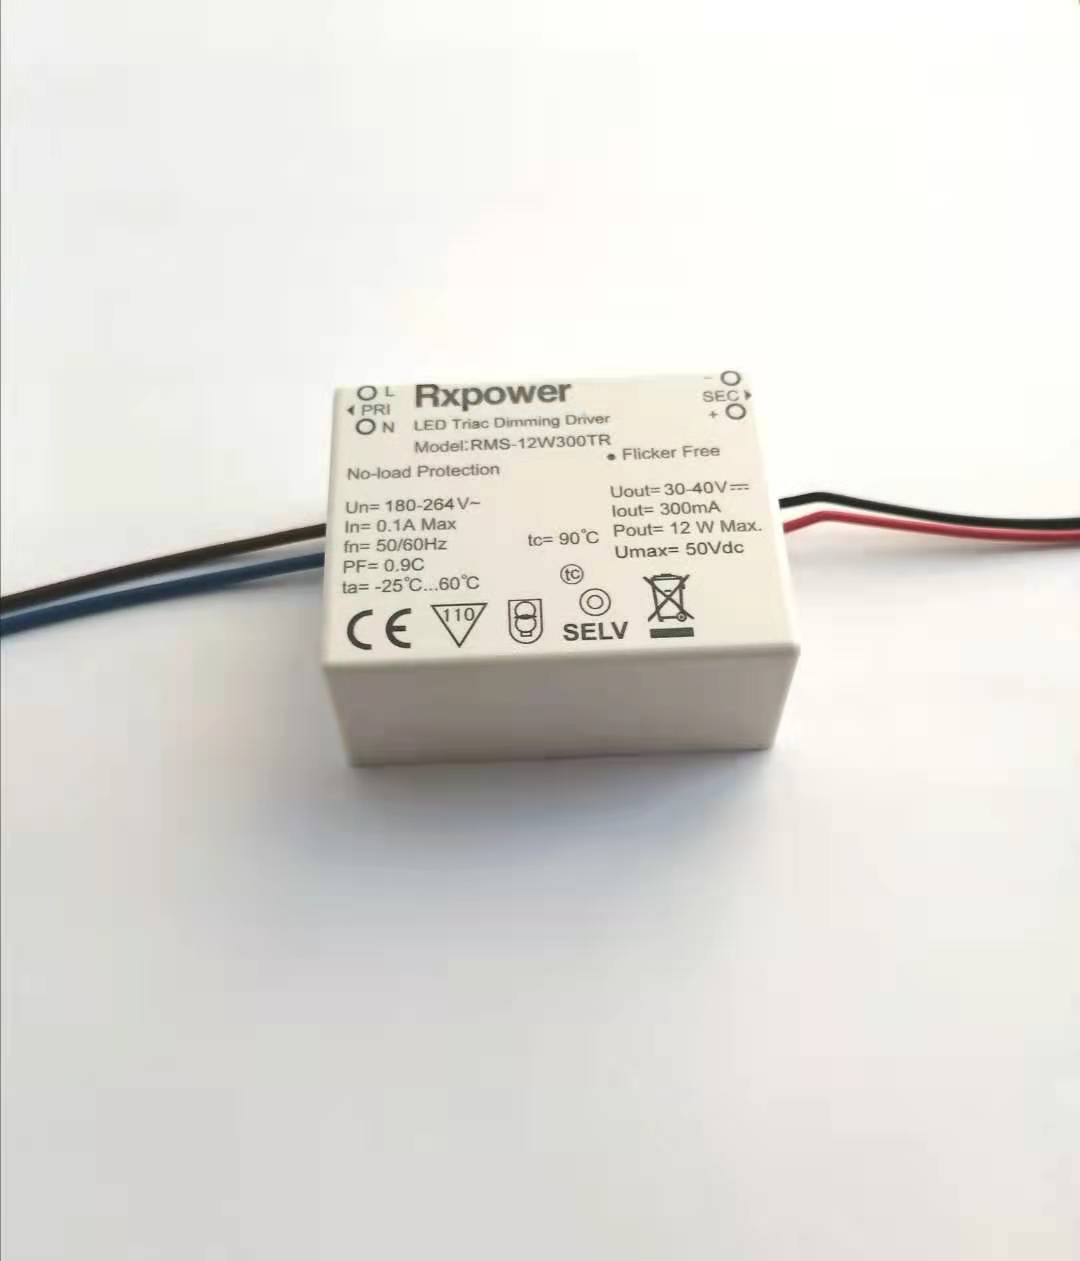 Triac Dimmable LED Driver 30W RMS-12W300TR